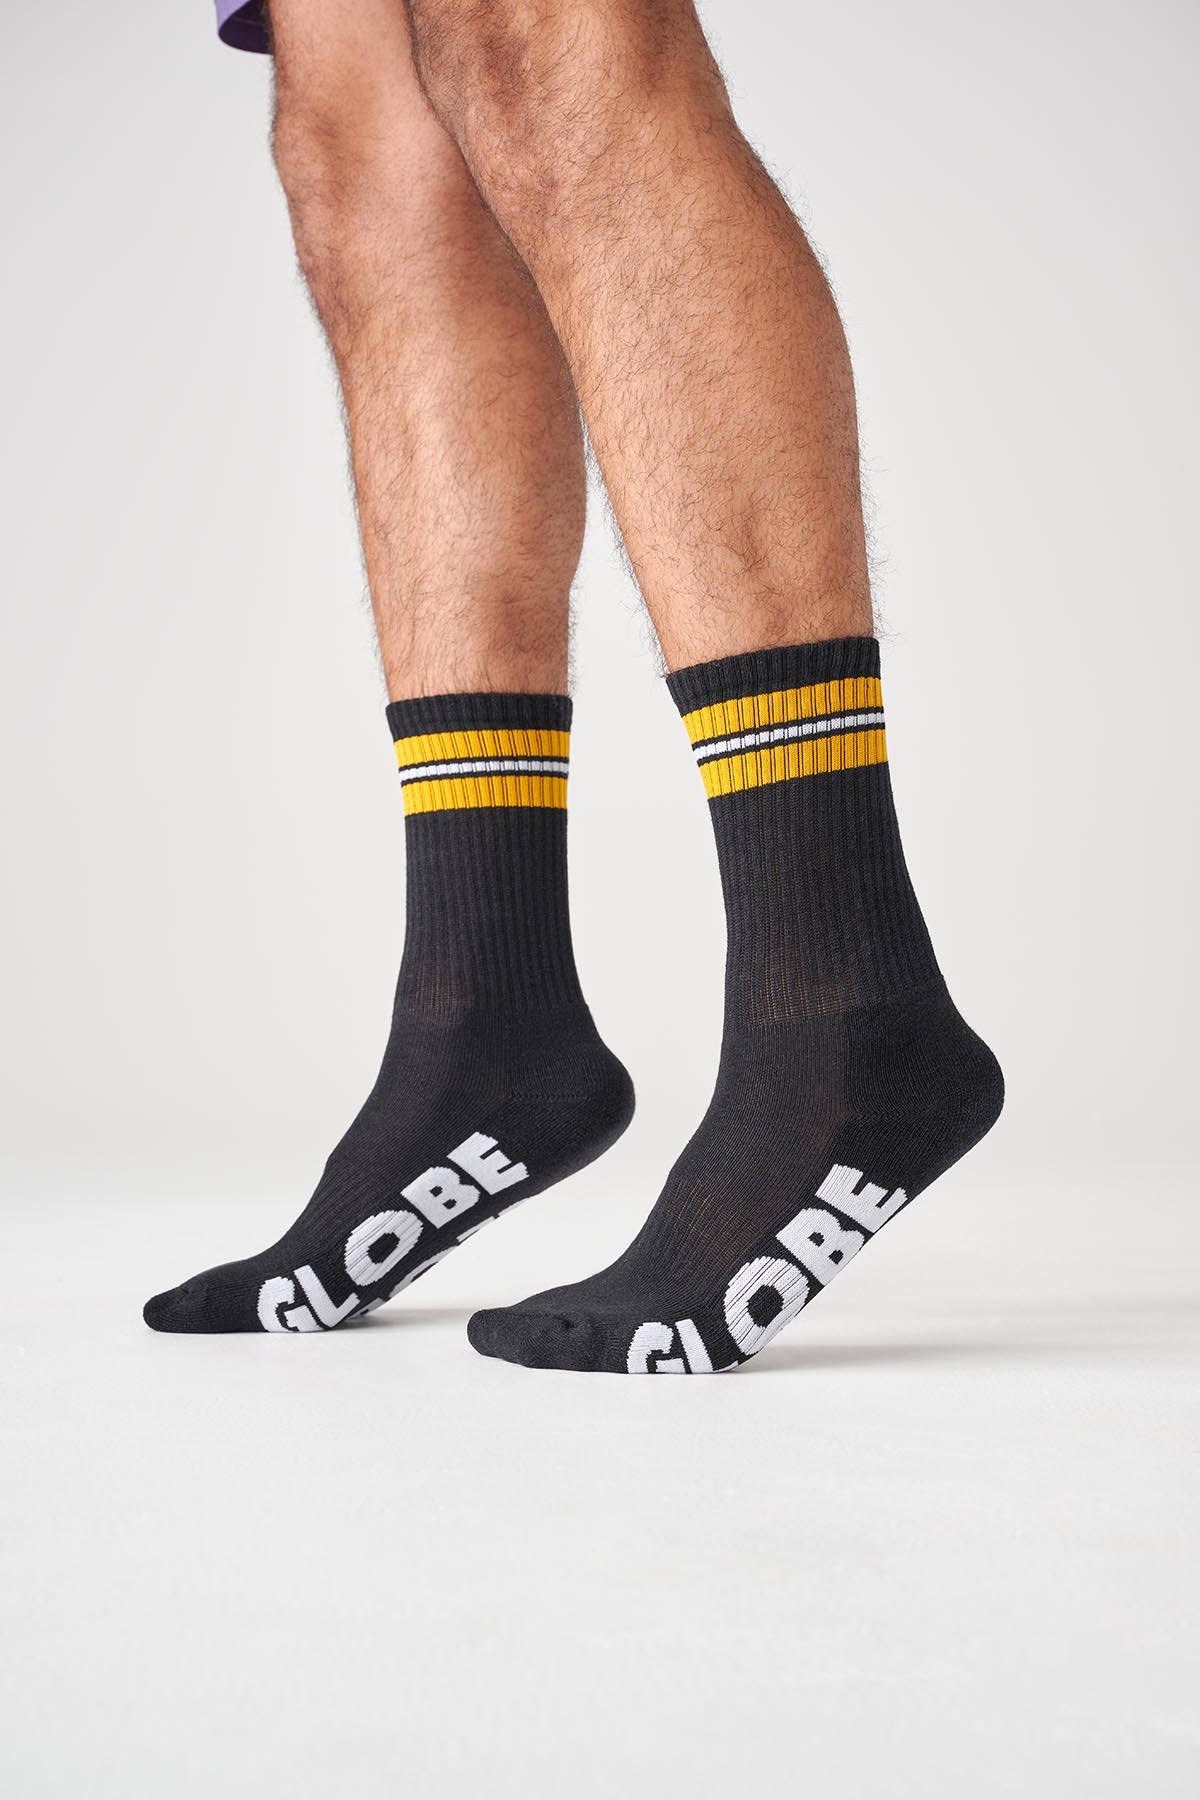 off course crew sock 3 pack assorted